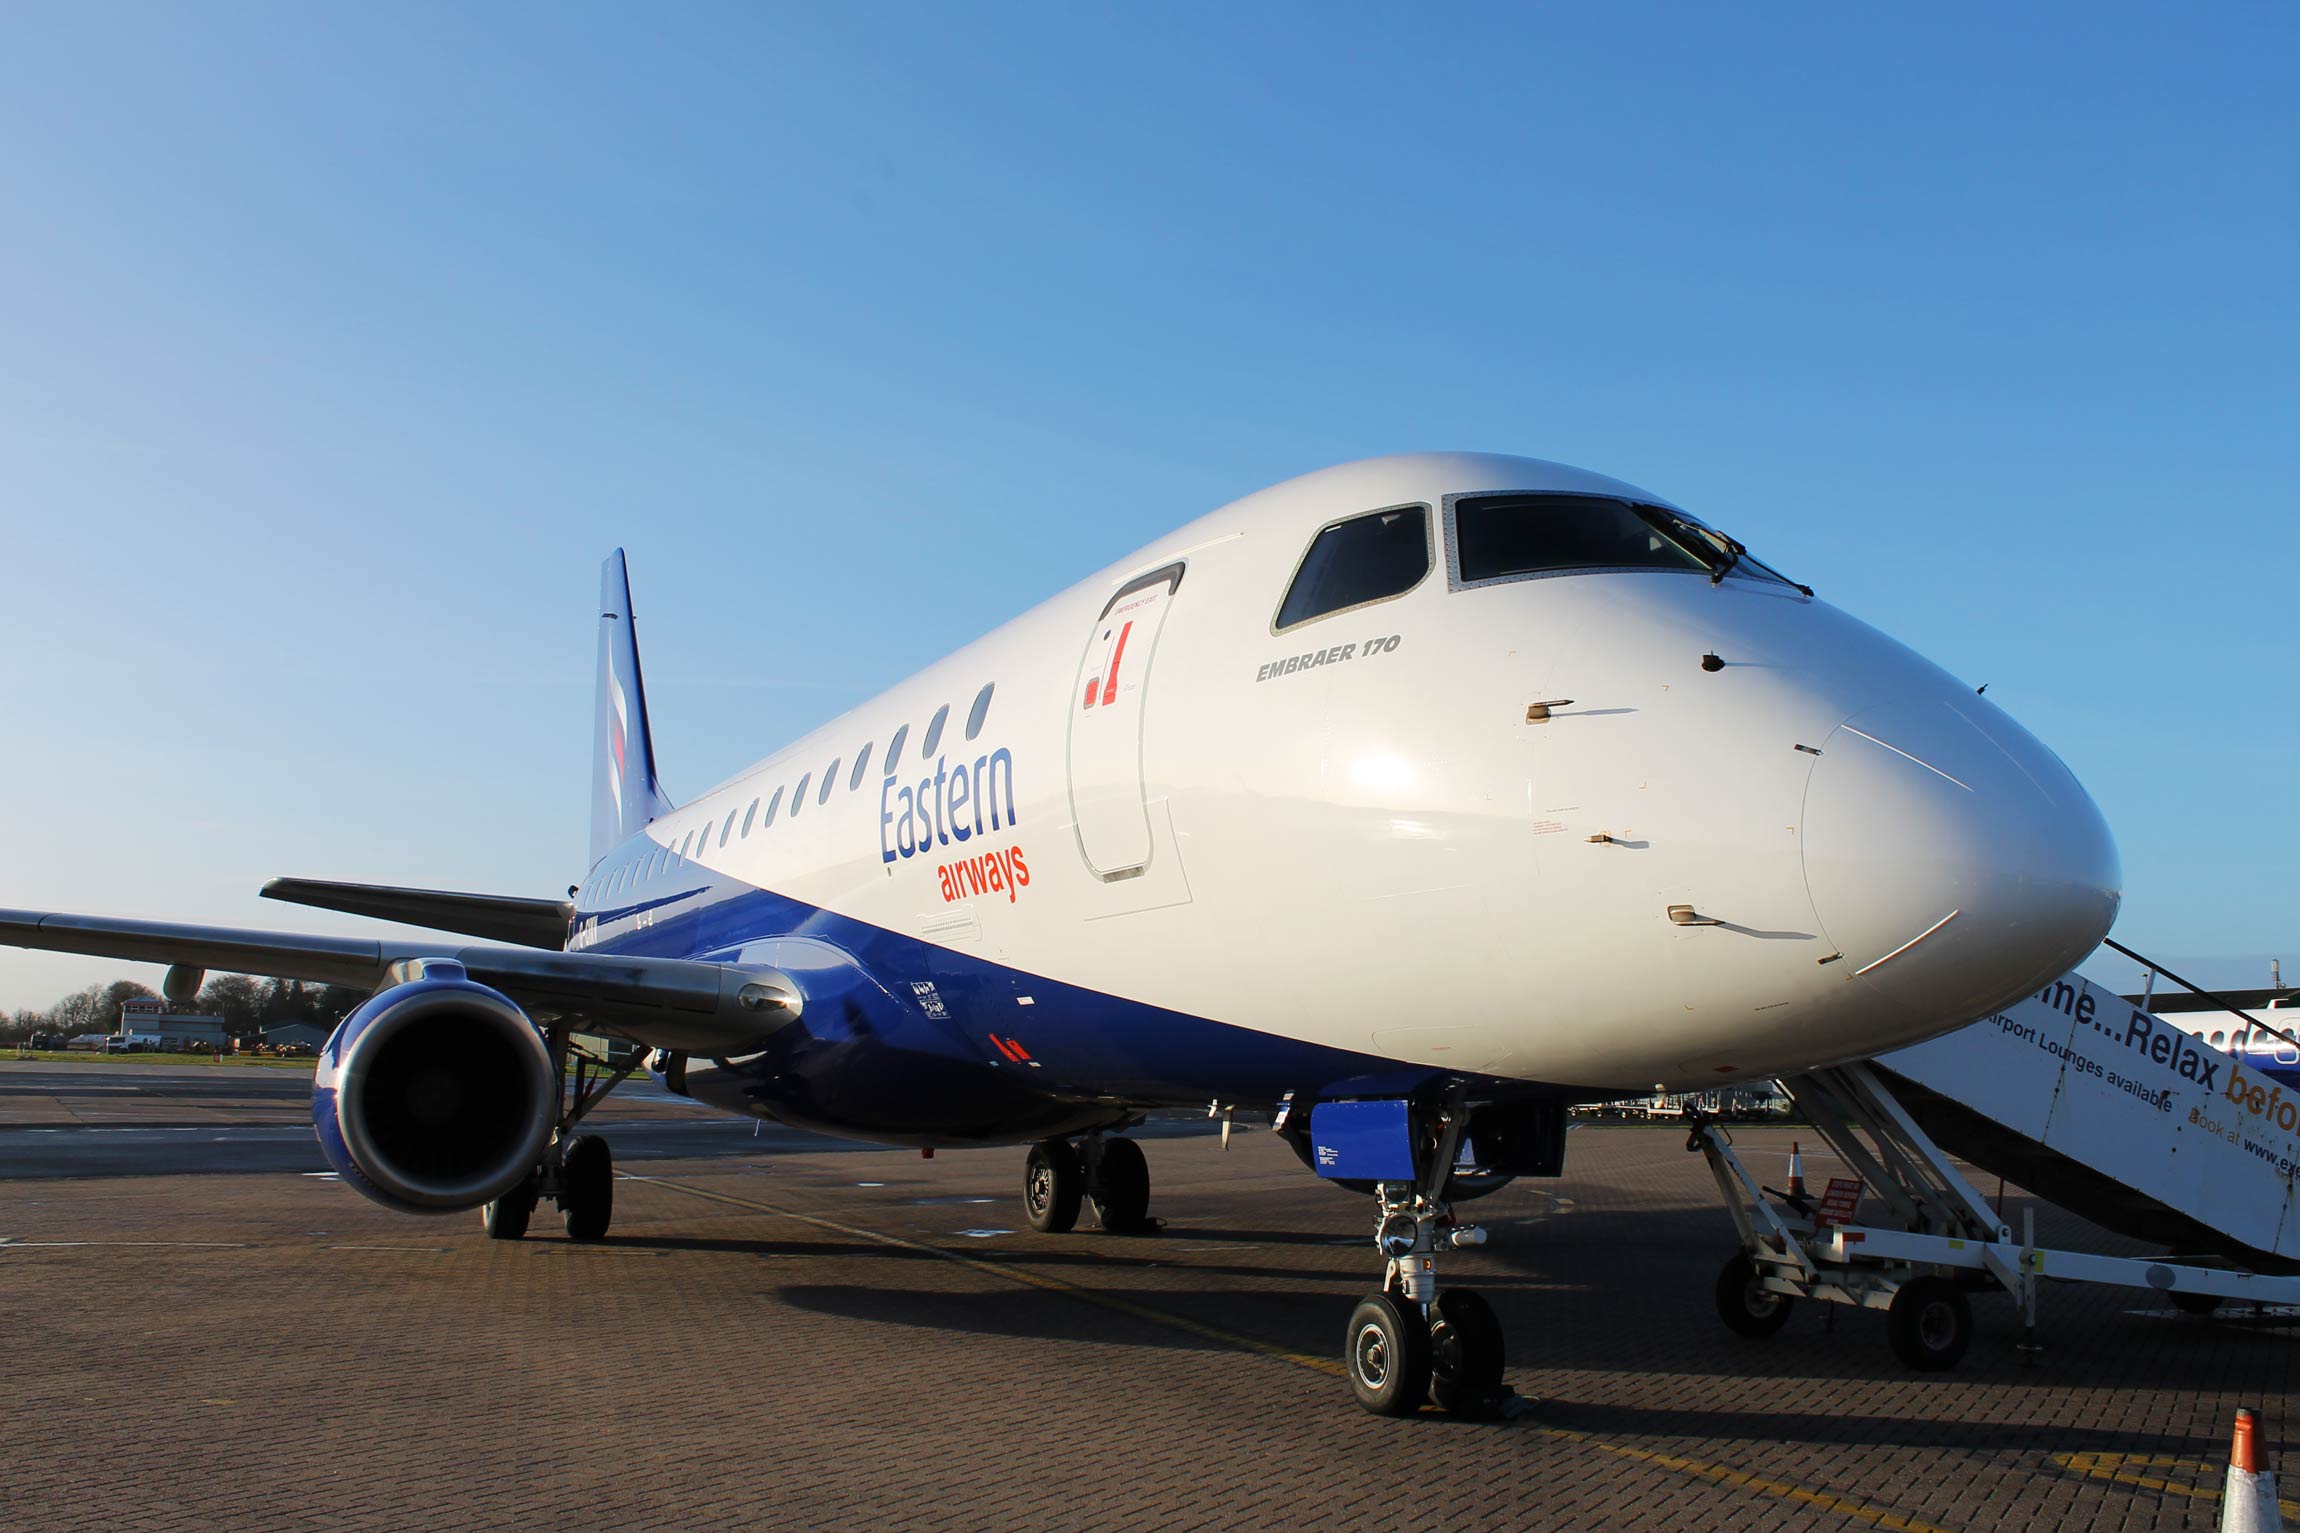 The Embraer 170-100 LR jet has a range of over 1,800 miles and is powered by two General Electric CF34-8E 5A1 jet engines